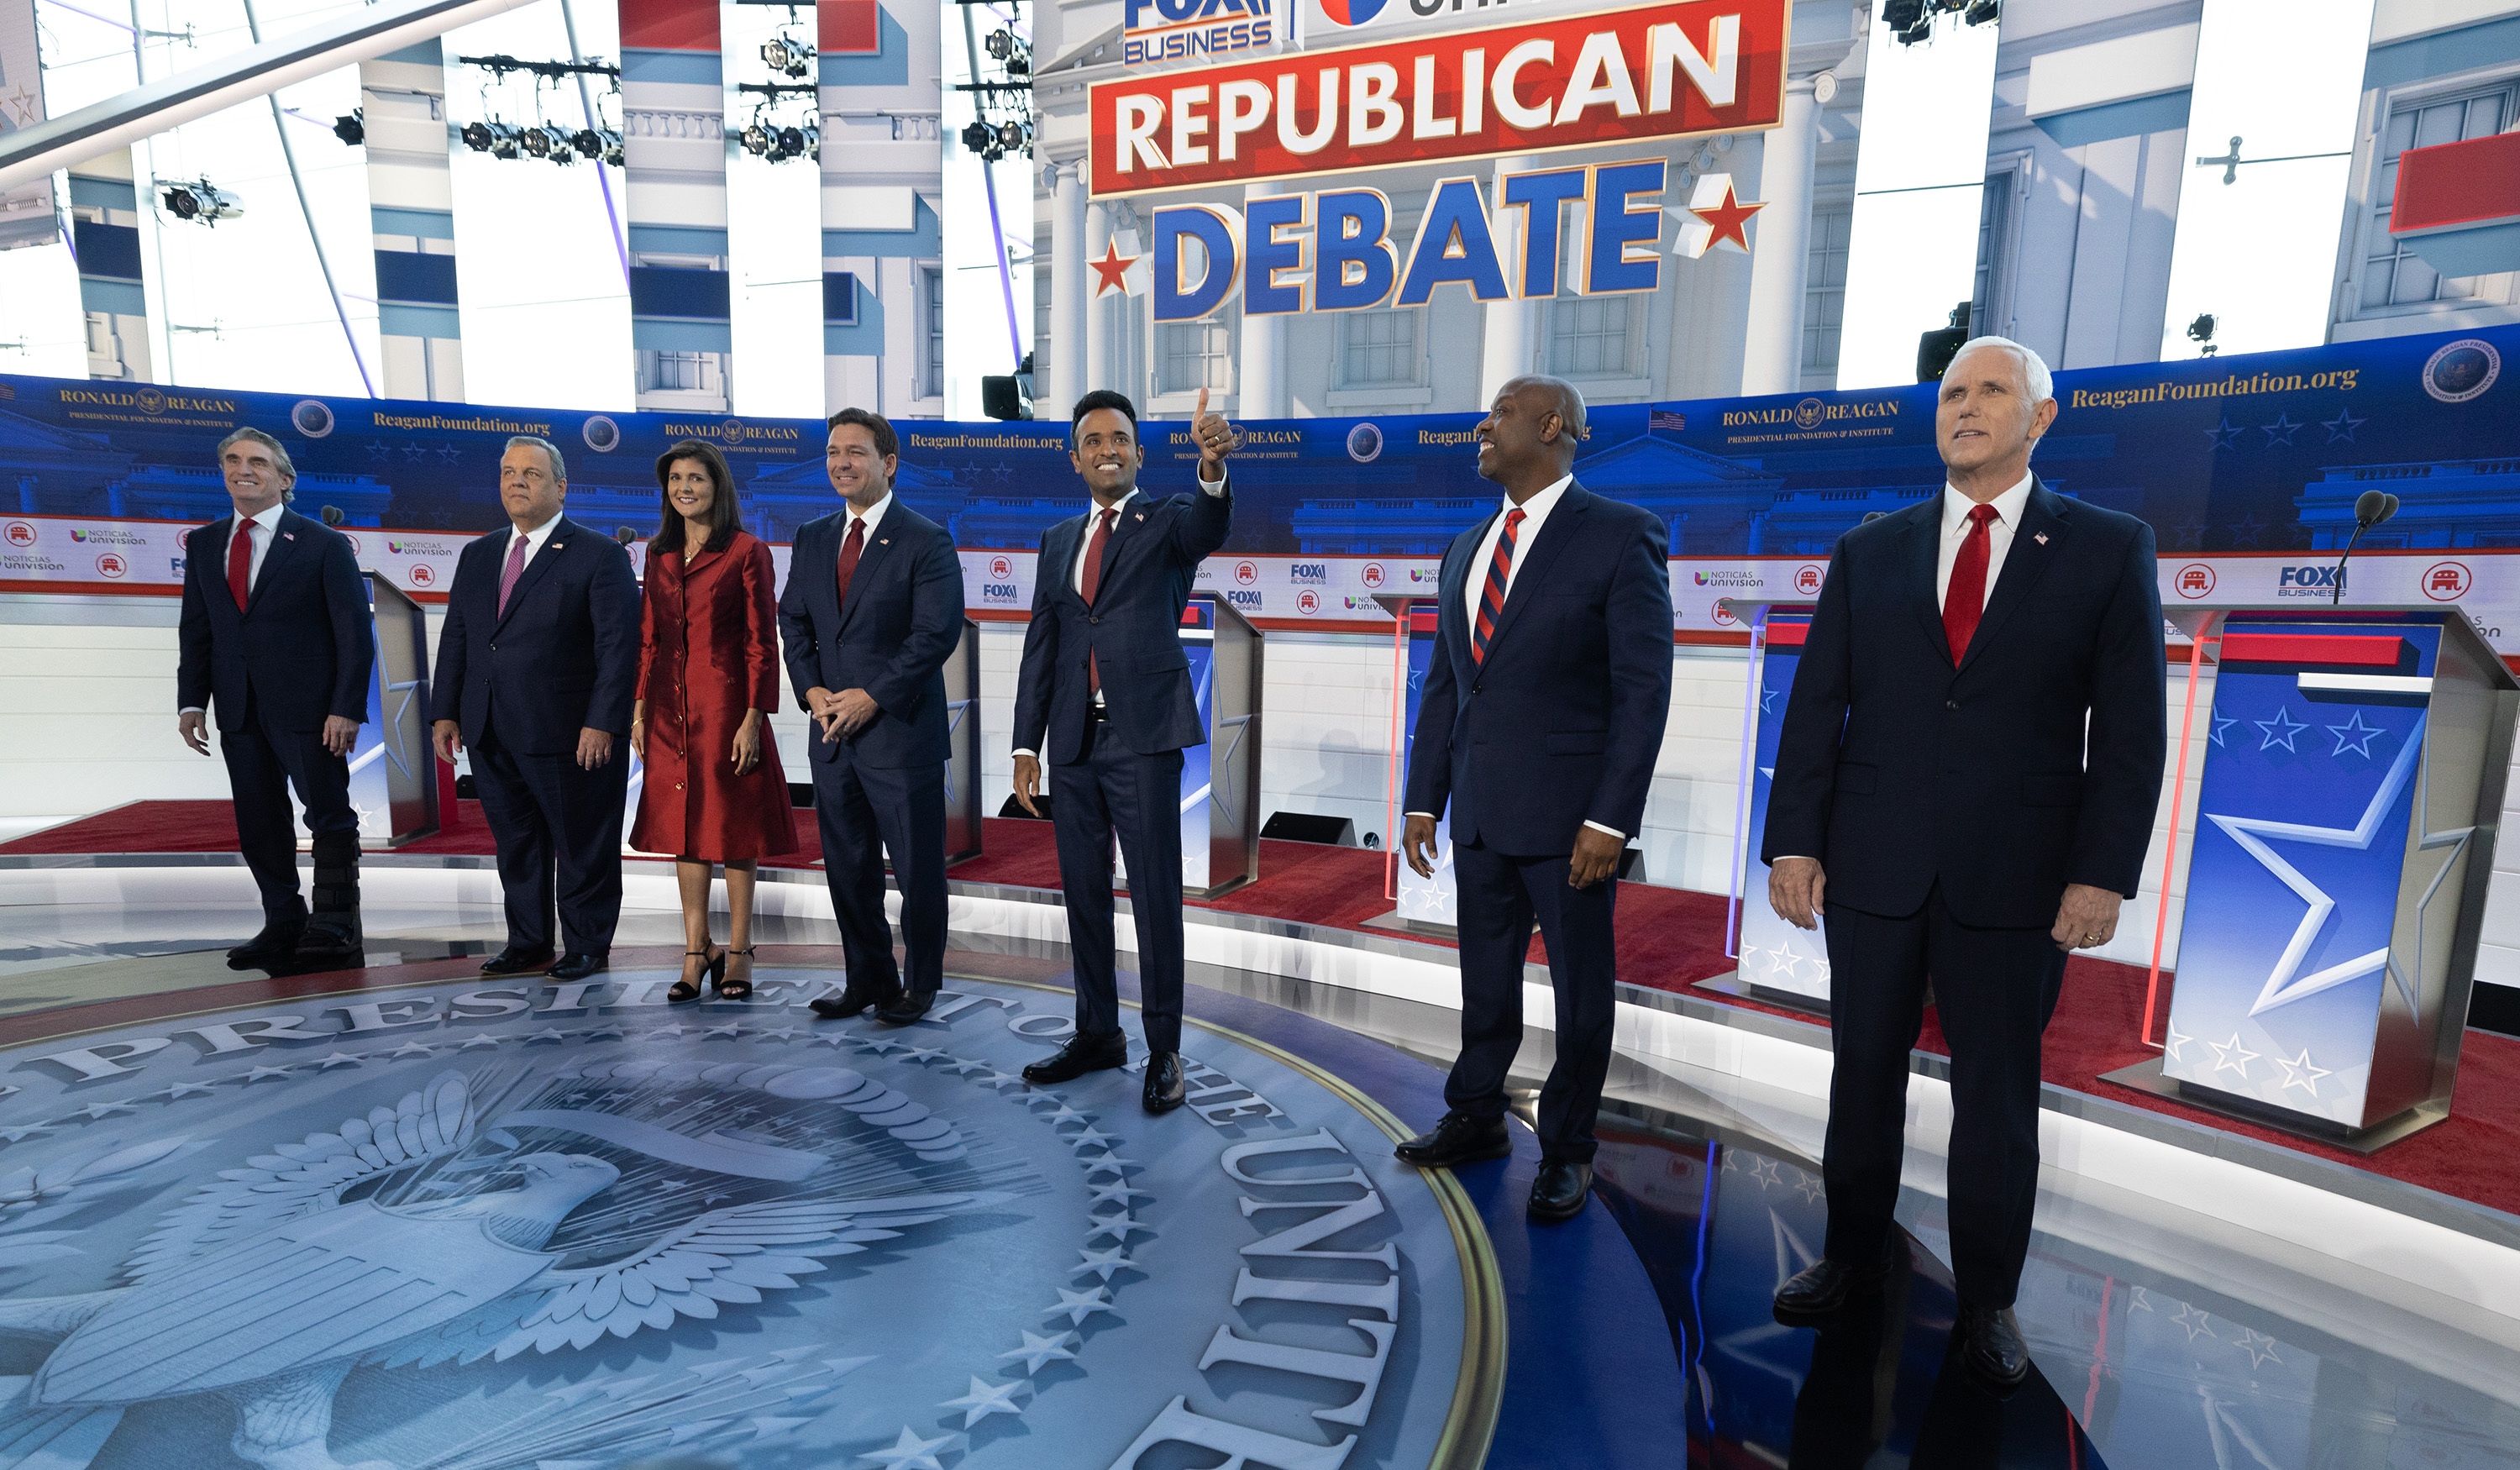 Winners and losers Georgia political scientists weigh in on the GOP debate pic photo